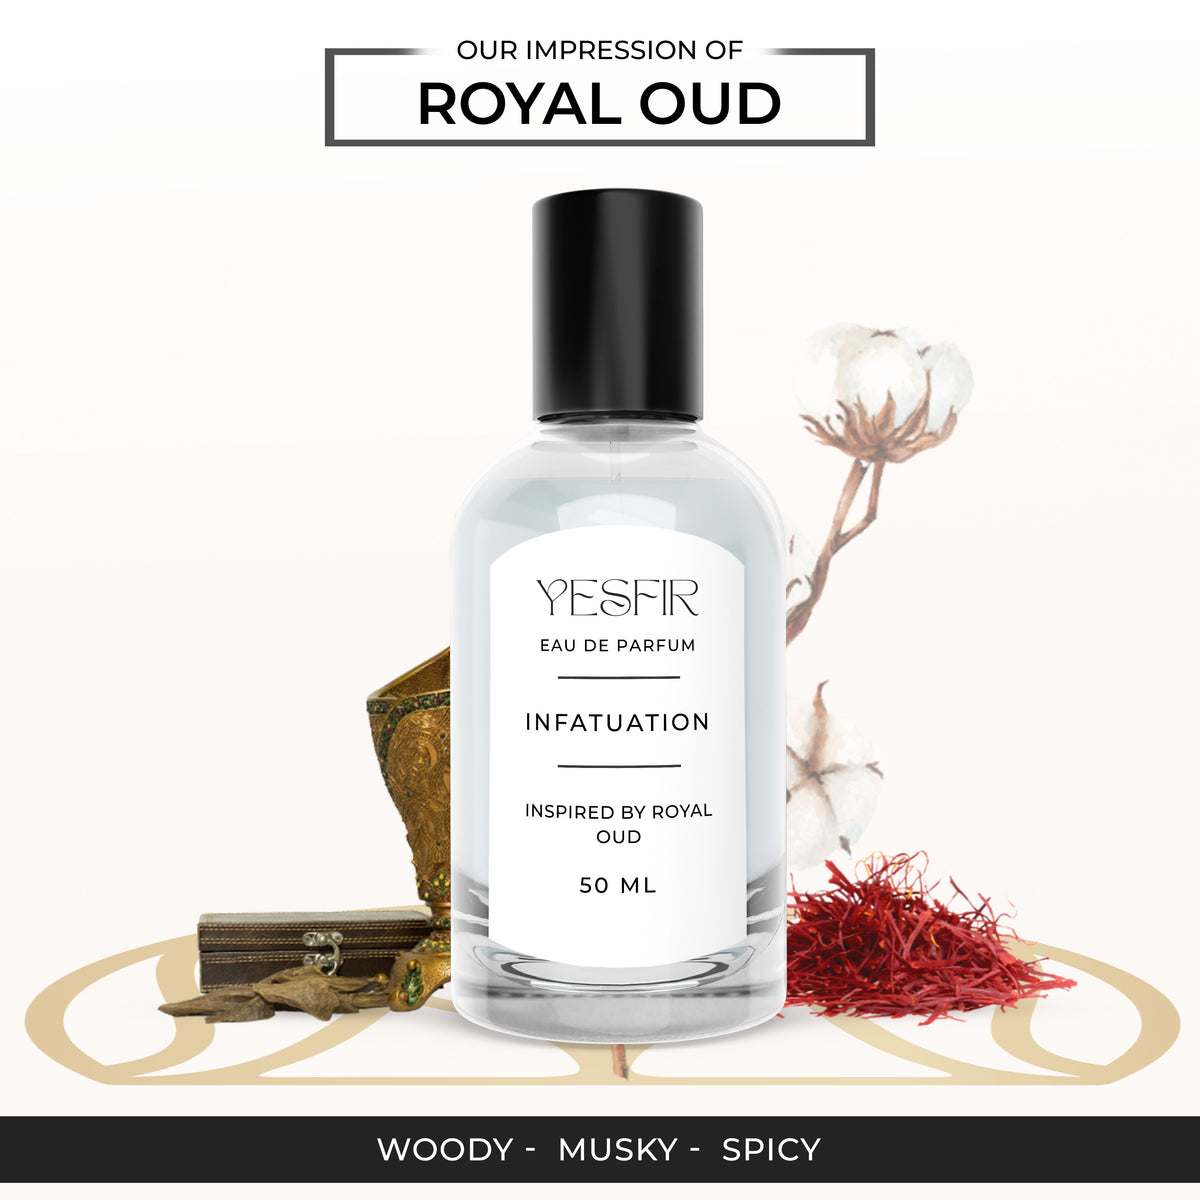 Infatuation - Inspired by Royal Oud